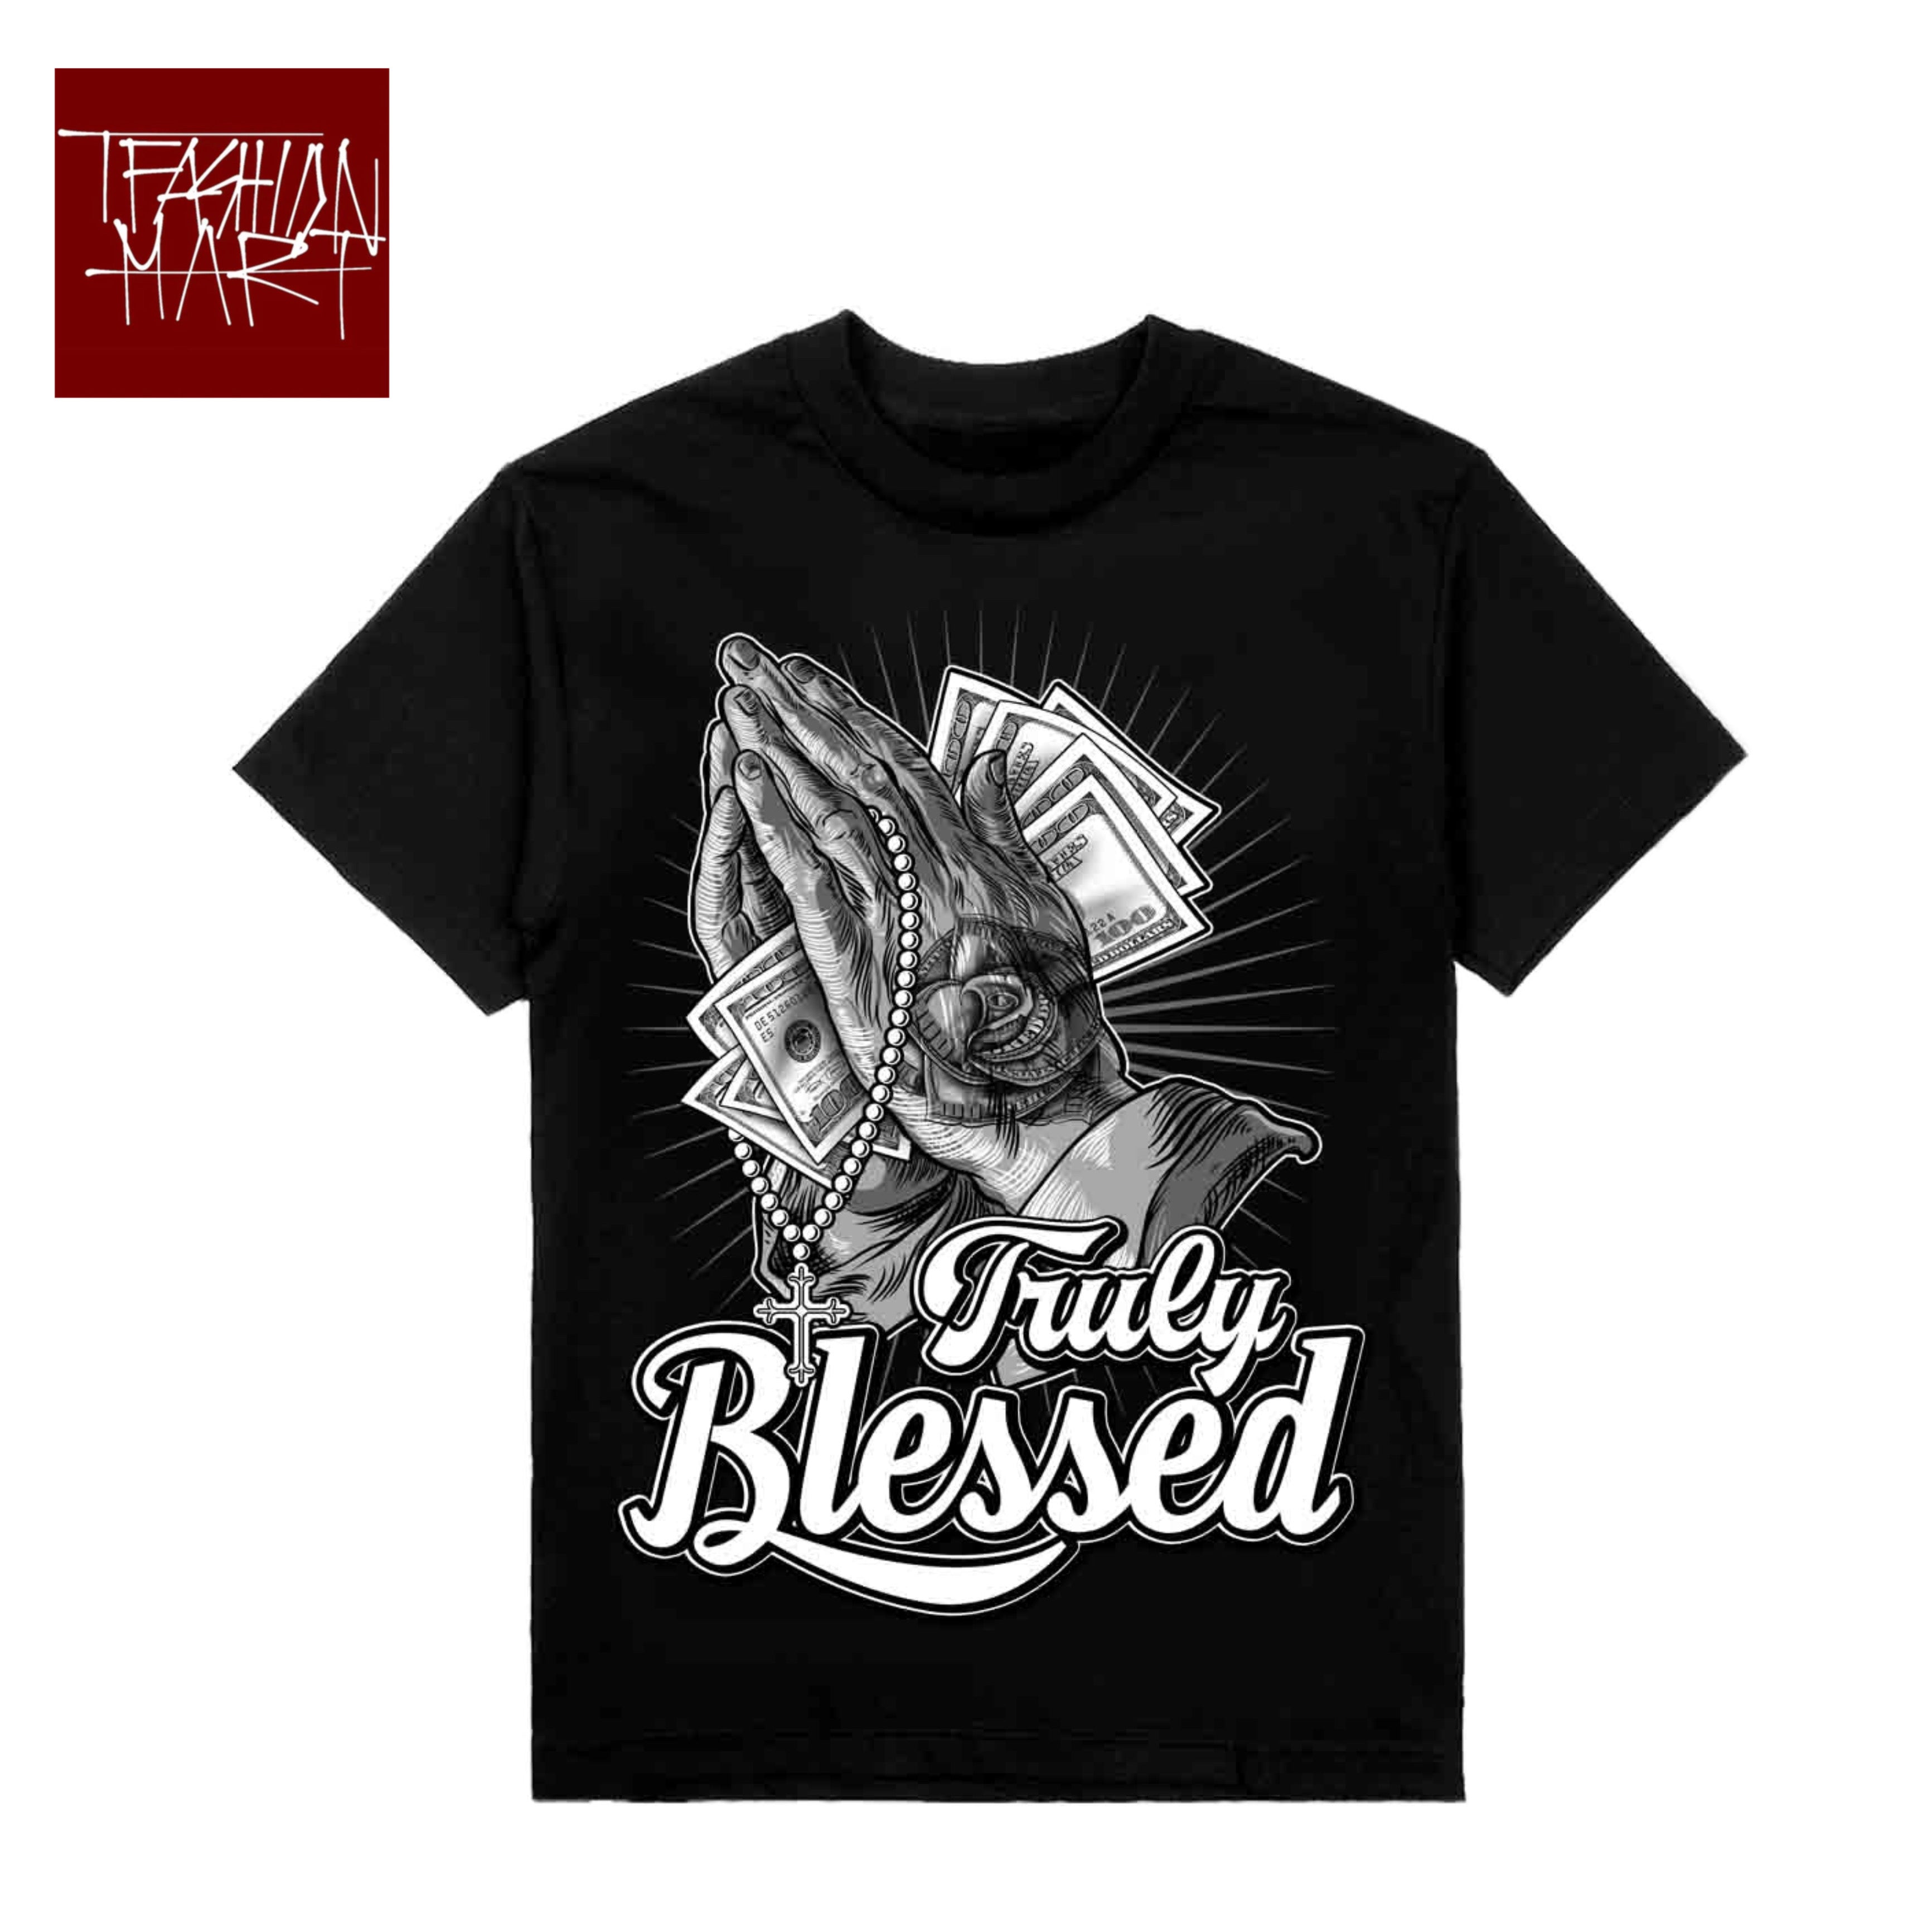 TFashion Graphic Tee - Truly Blessed